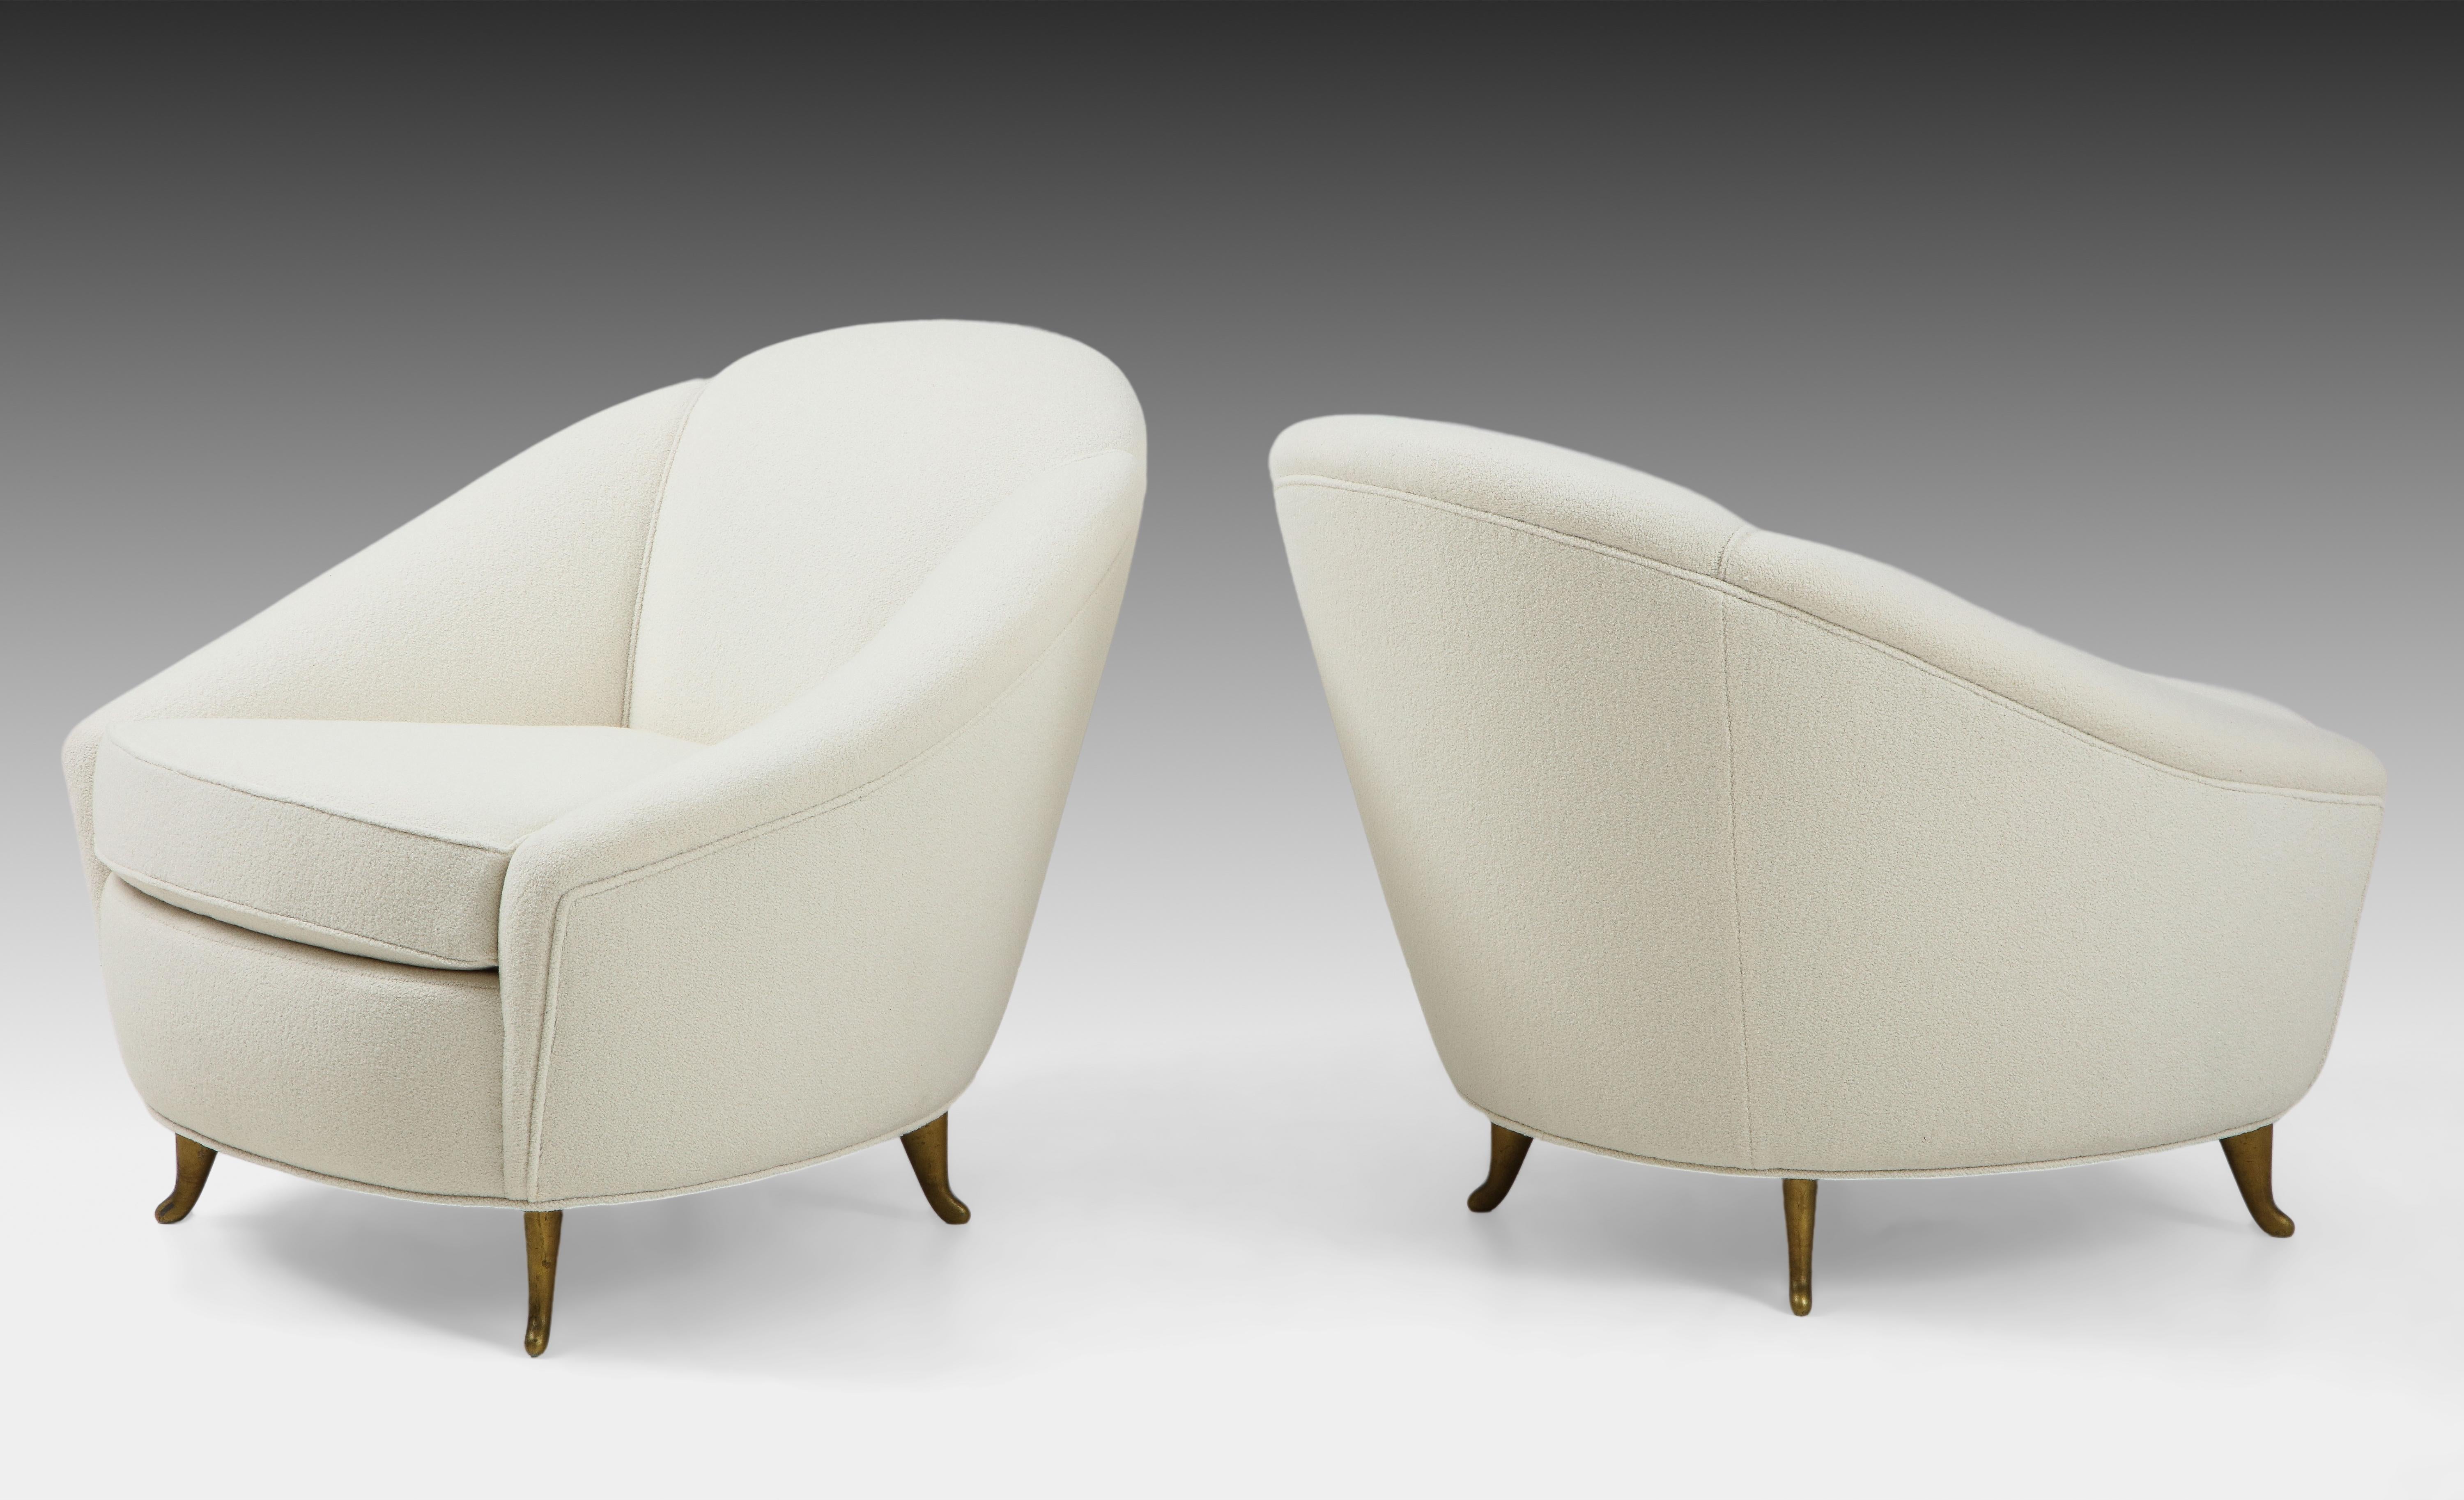 Designed by Gio Ponti in 1936 and manufactured by ISA Bergamo in the 1950s, pair of upholstered armchairs or lounge chairs with elegantly curved back and signature brass legs. These classic and exquisite armchairs have been fully restored and newly